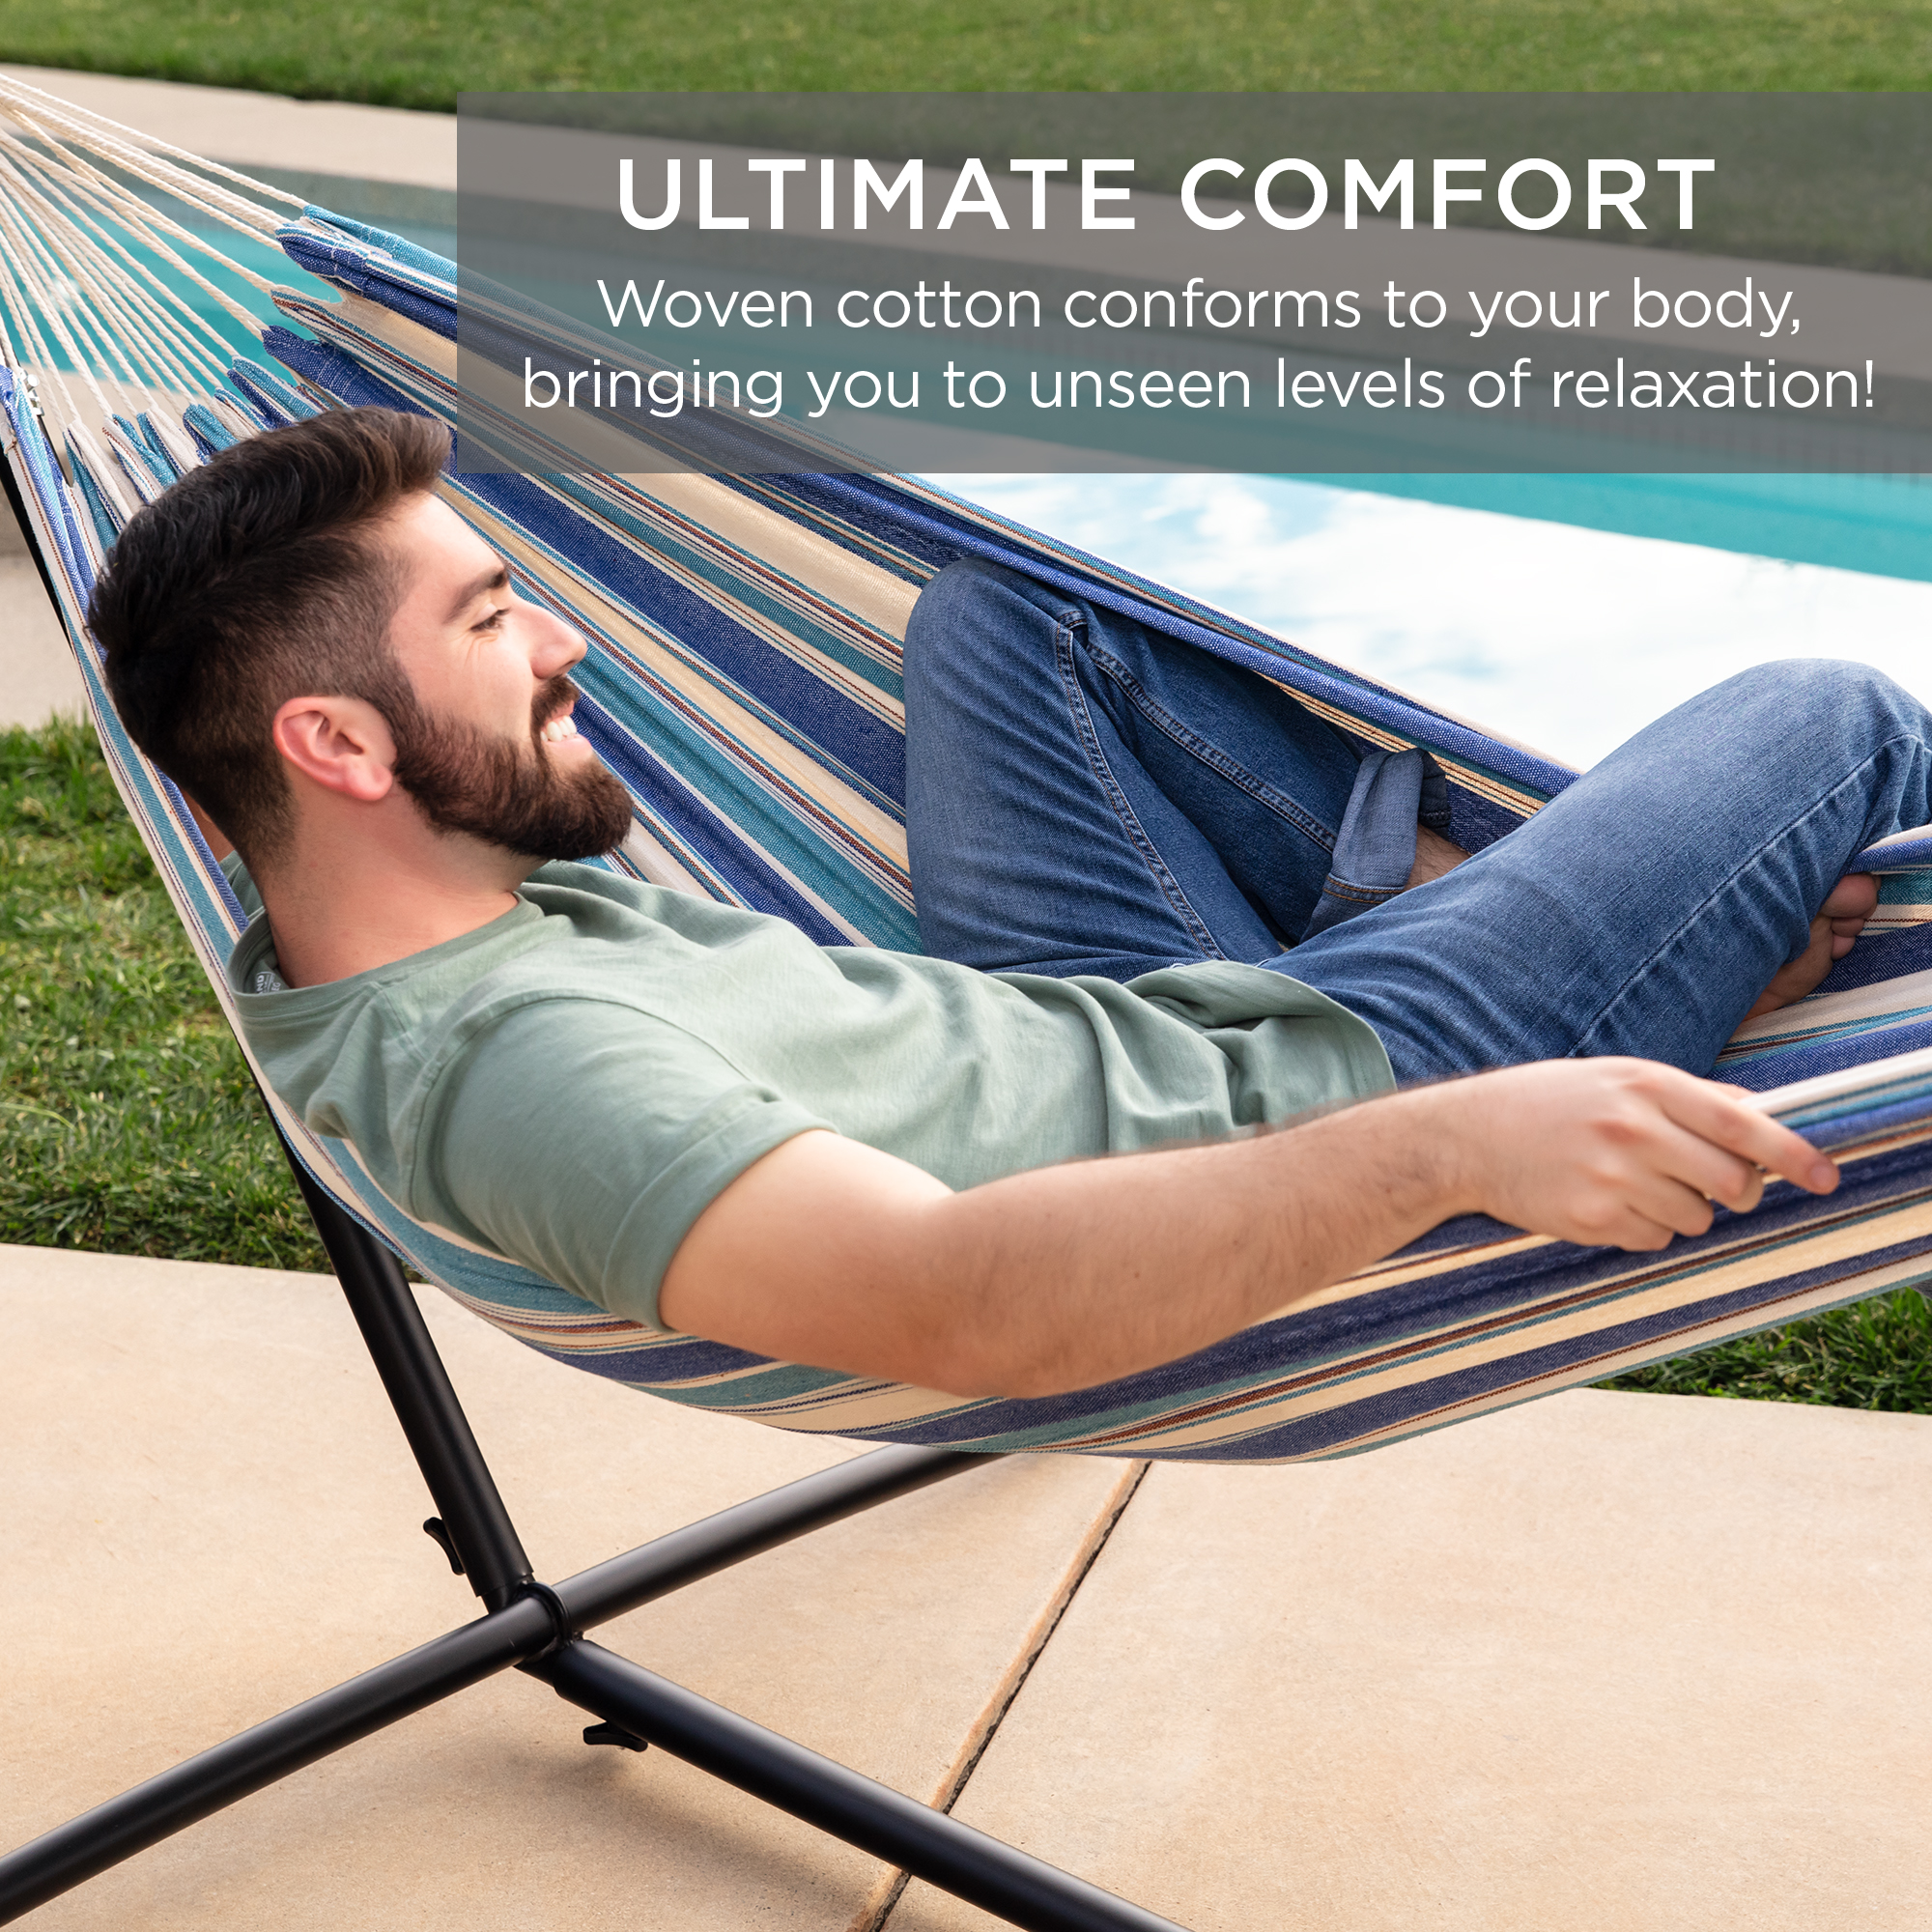 Best Choice Products 2-Person Brazilian-Style Cotton Double Hammock with Stand Set w/ Carrying Bag - Ocean - image 4 of 7